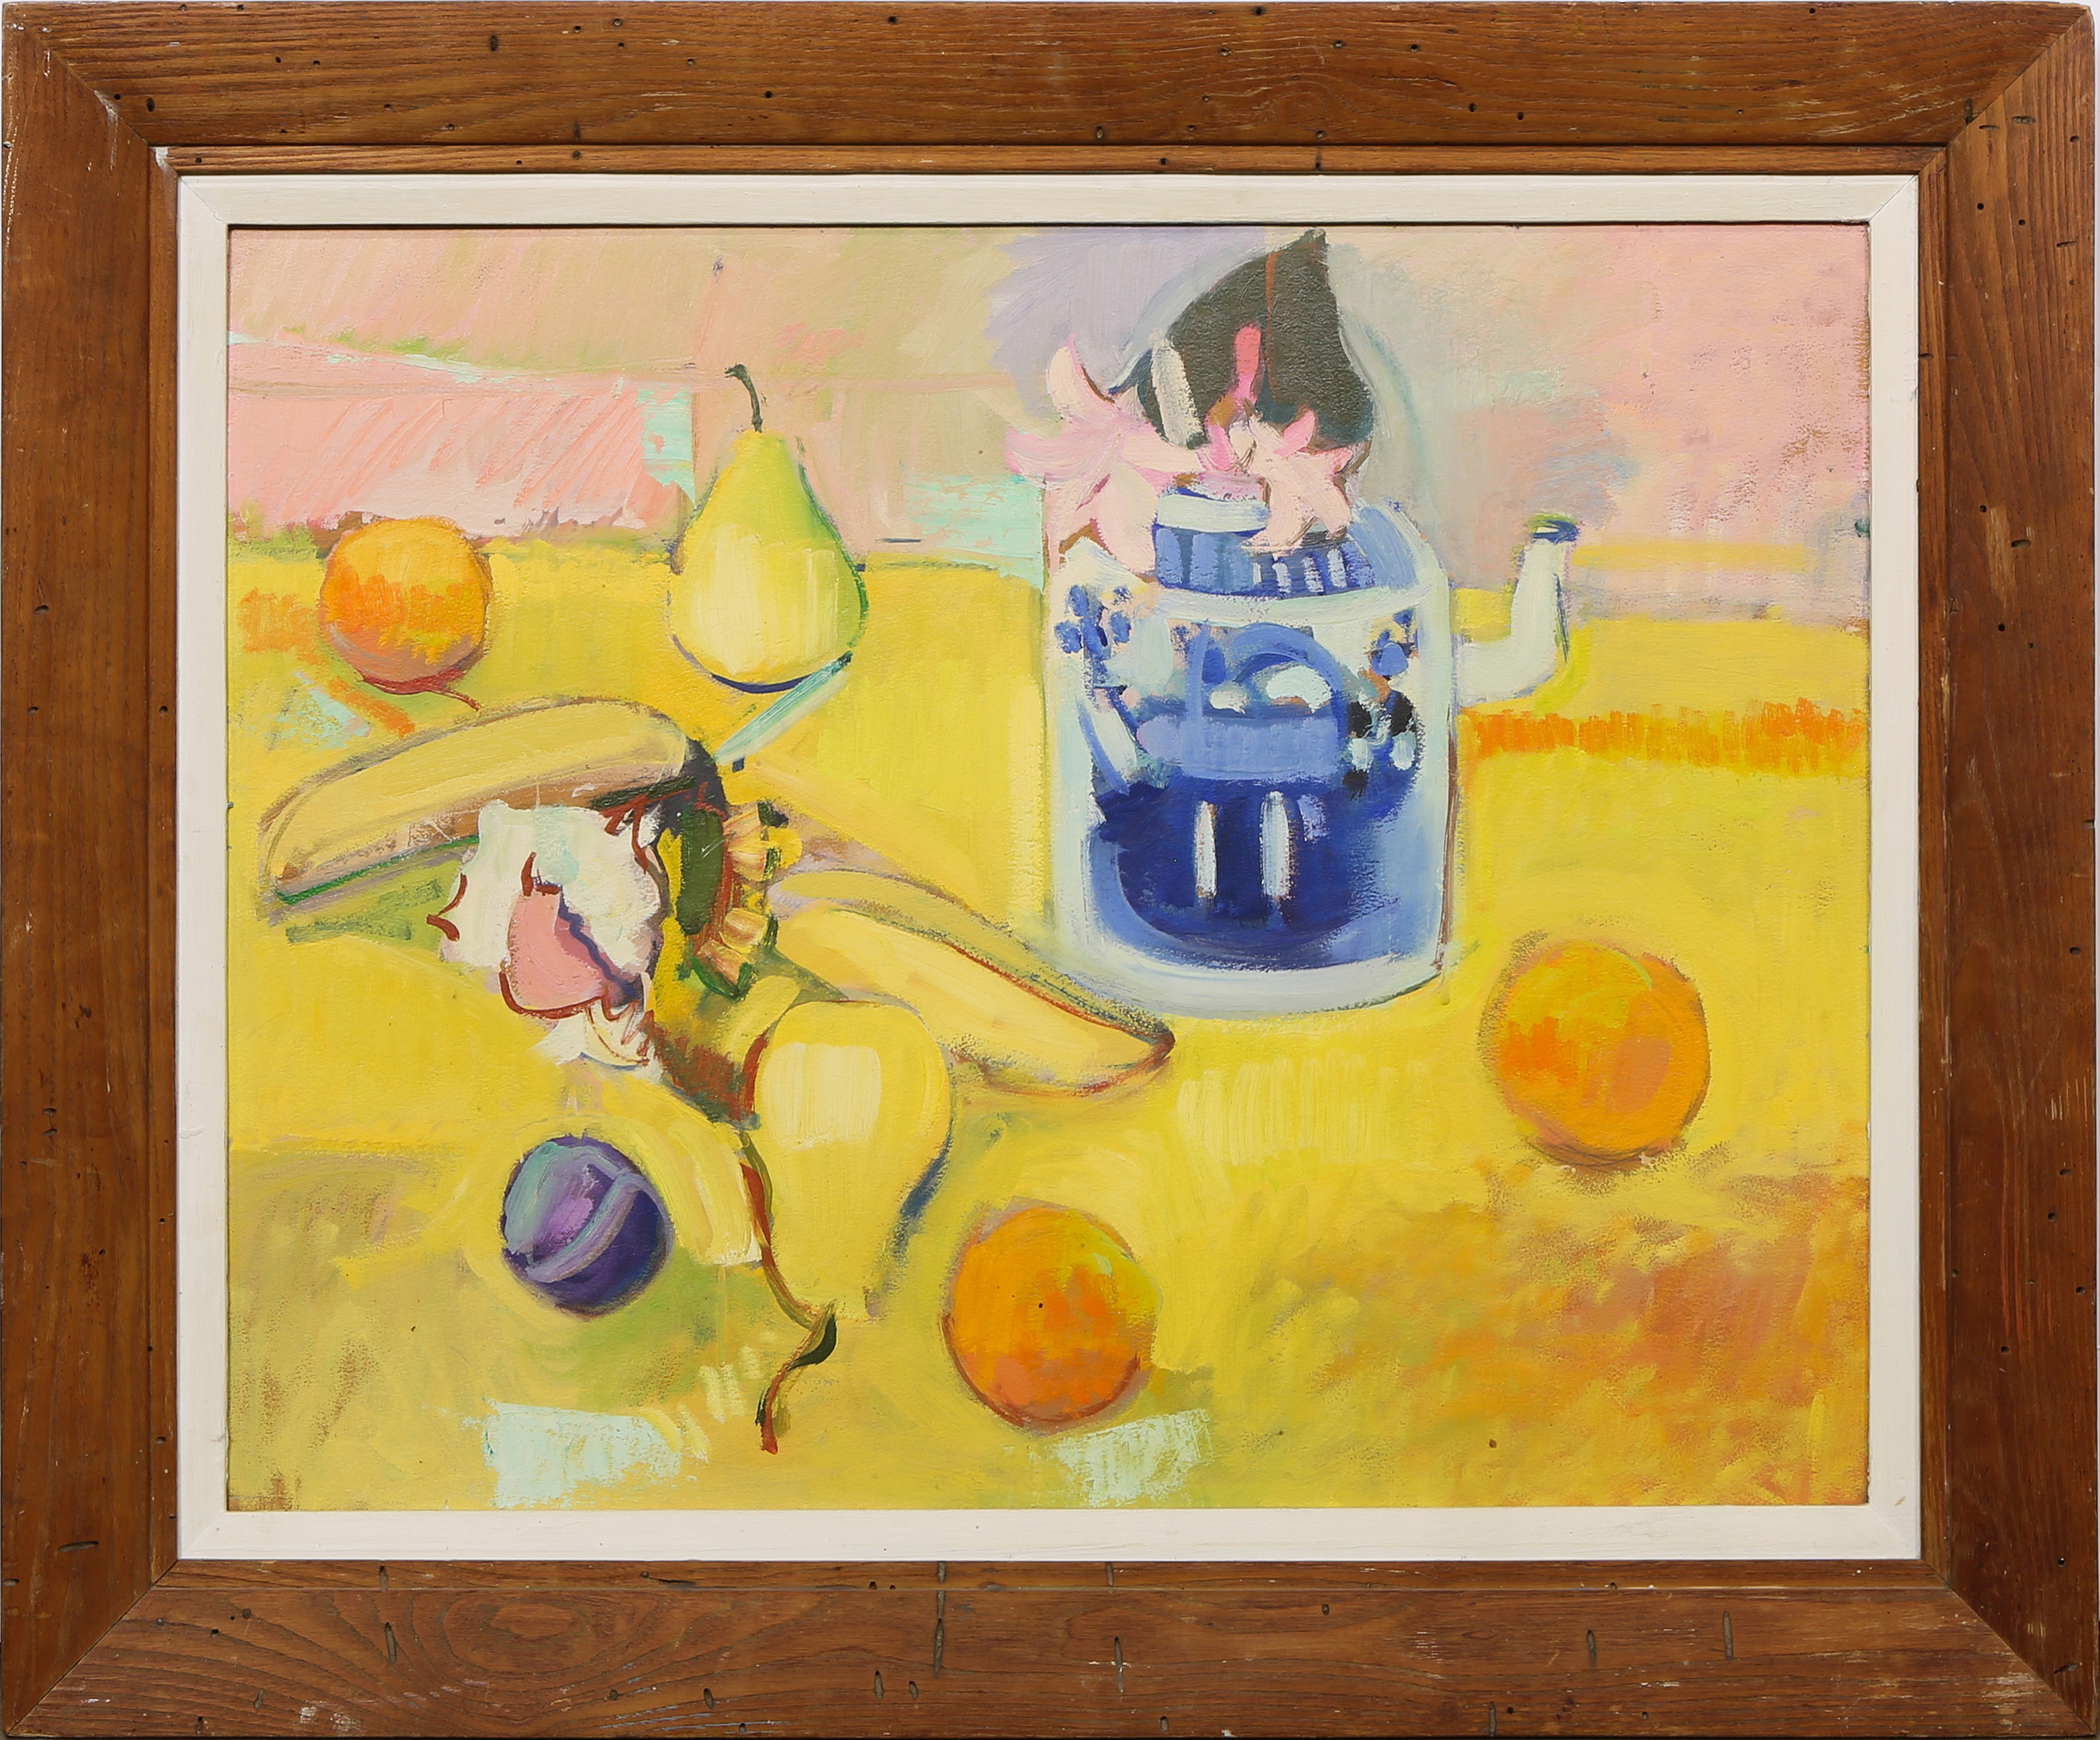 PAINTING STILL LIFE WITH FRUIT 3a6a77